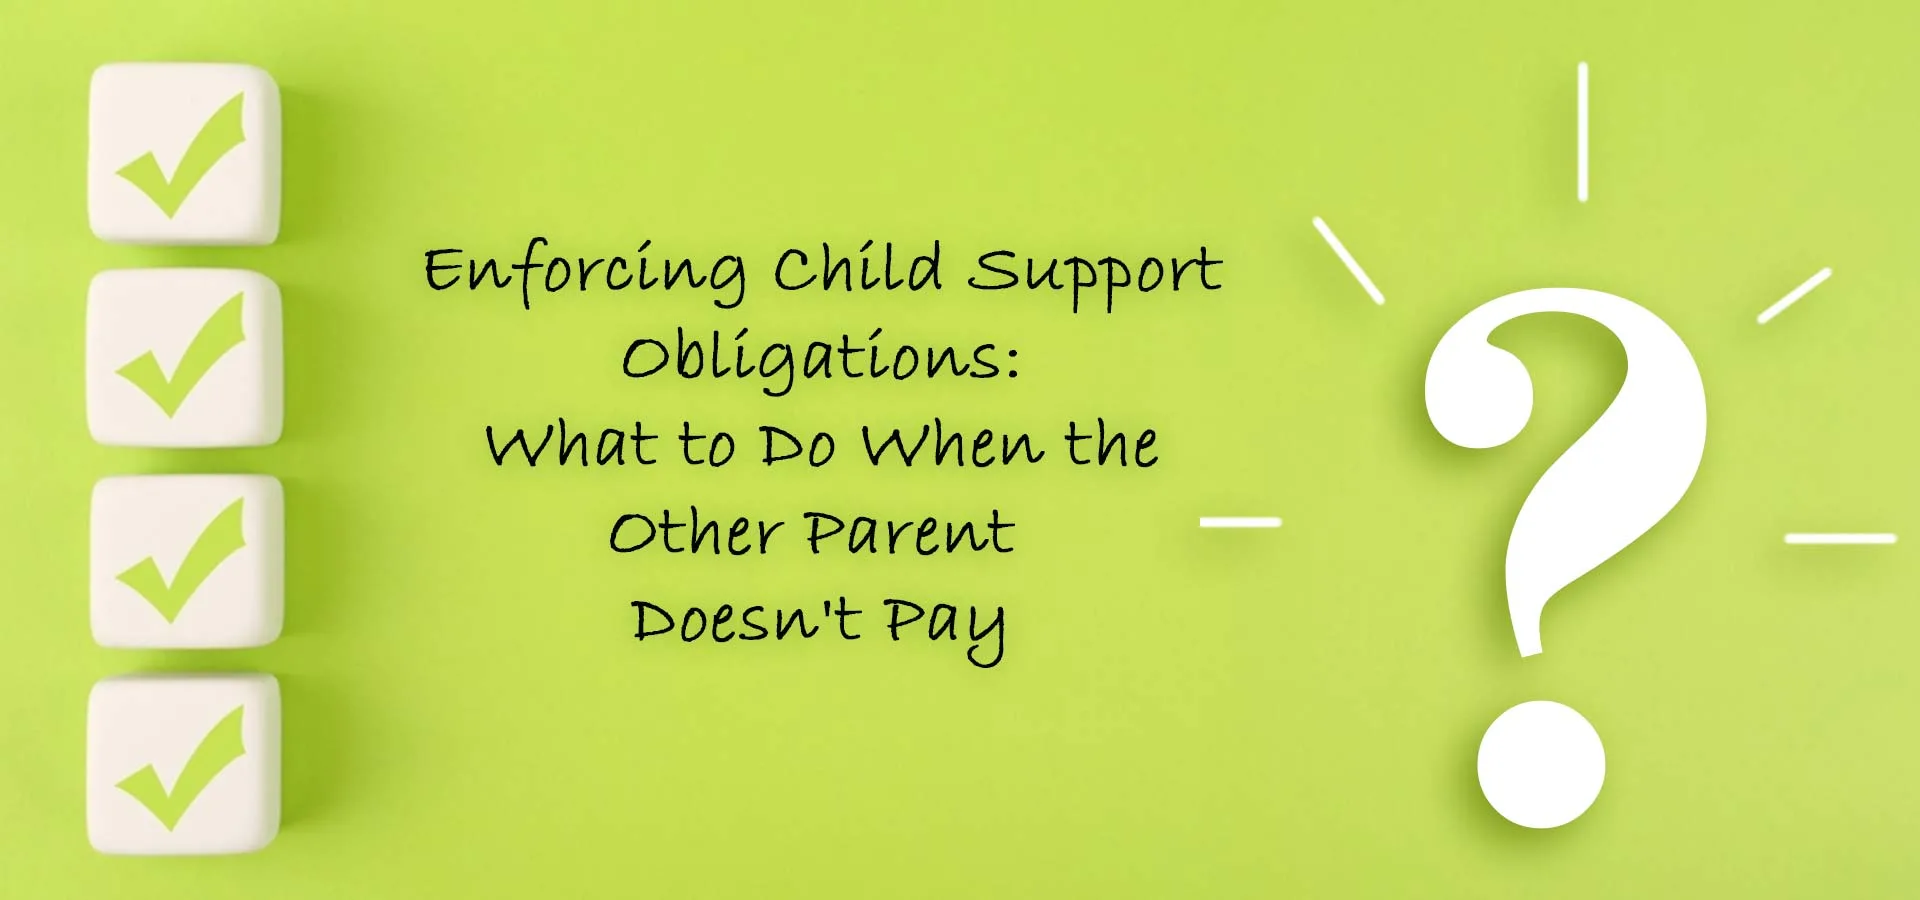 Enforcing Child Support Obligations: What to Do When the Other Parent Doesn't Pay